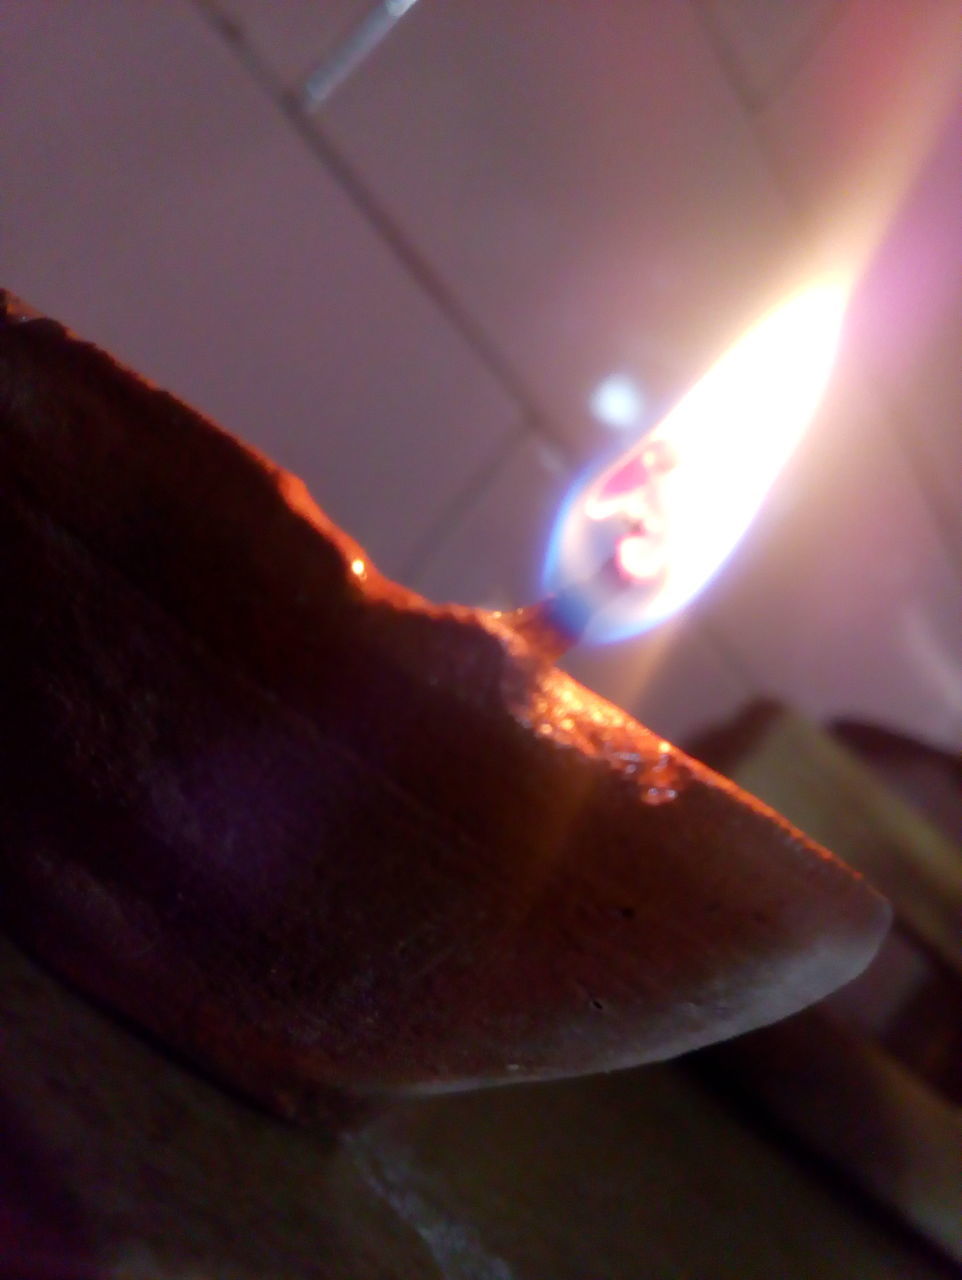 CLOSE-UP OF LIT CANDLE ON STAGE